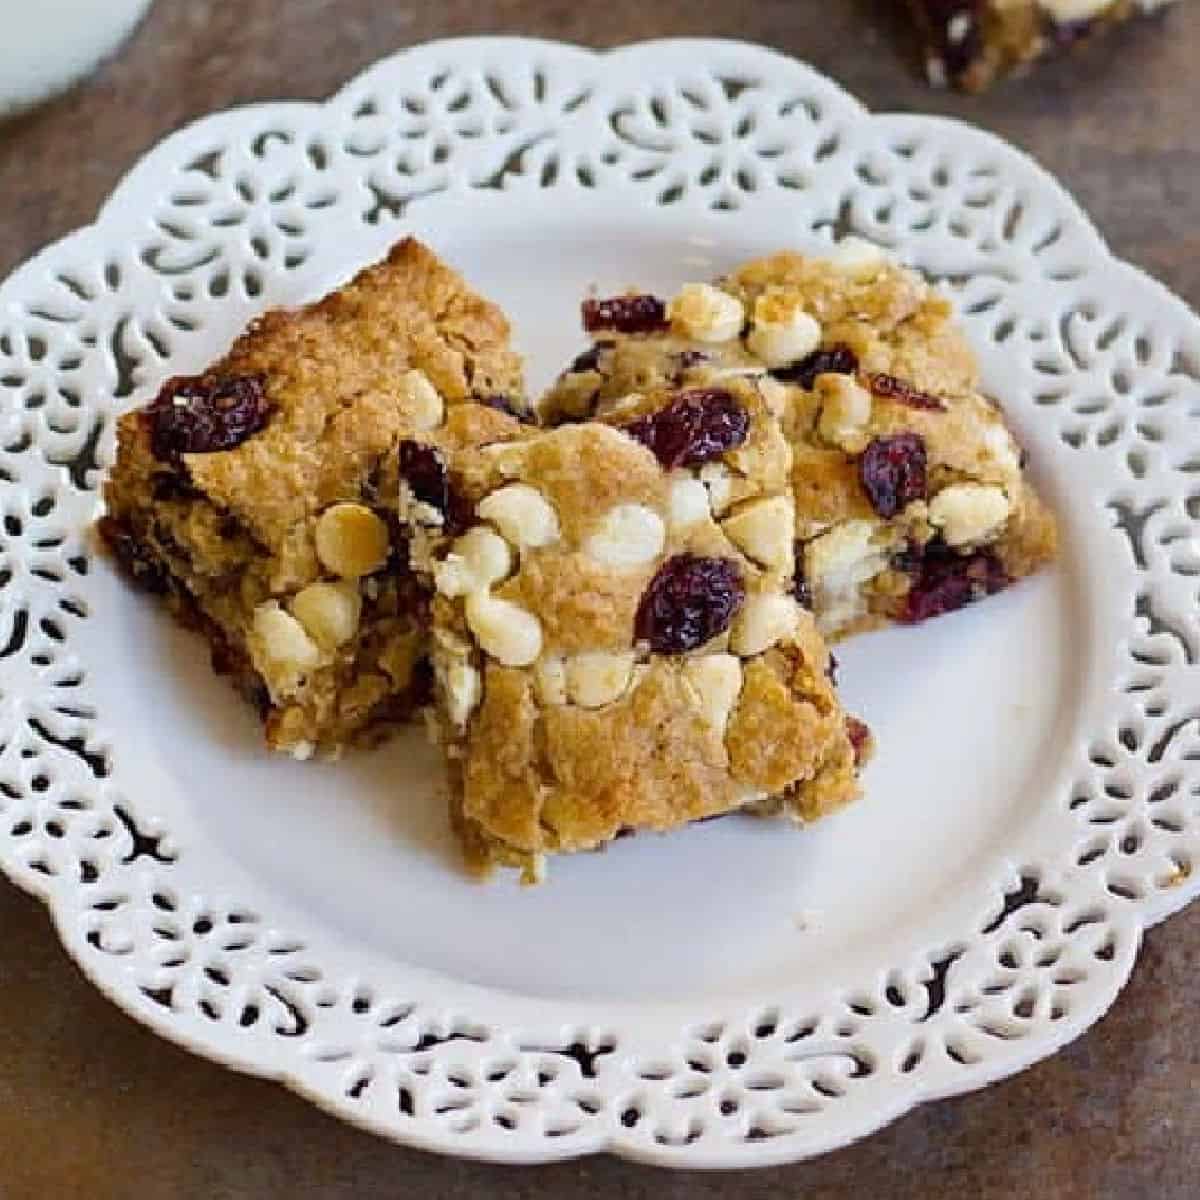 These Cranberry White Chocolate Oatmeal Cookie Bars have all the good flavors in one single bite! Sweet and tart cranberries go very well with festive white chocolate morsels! 
